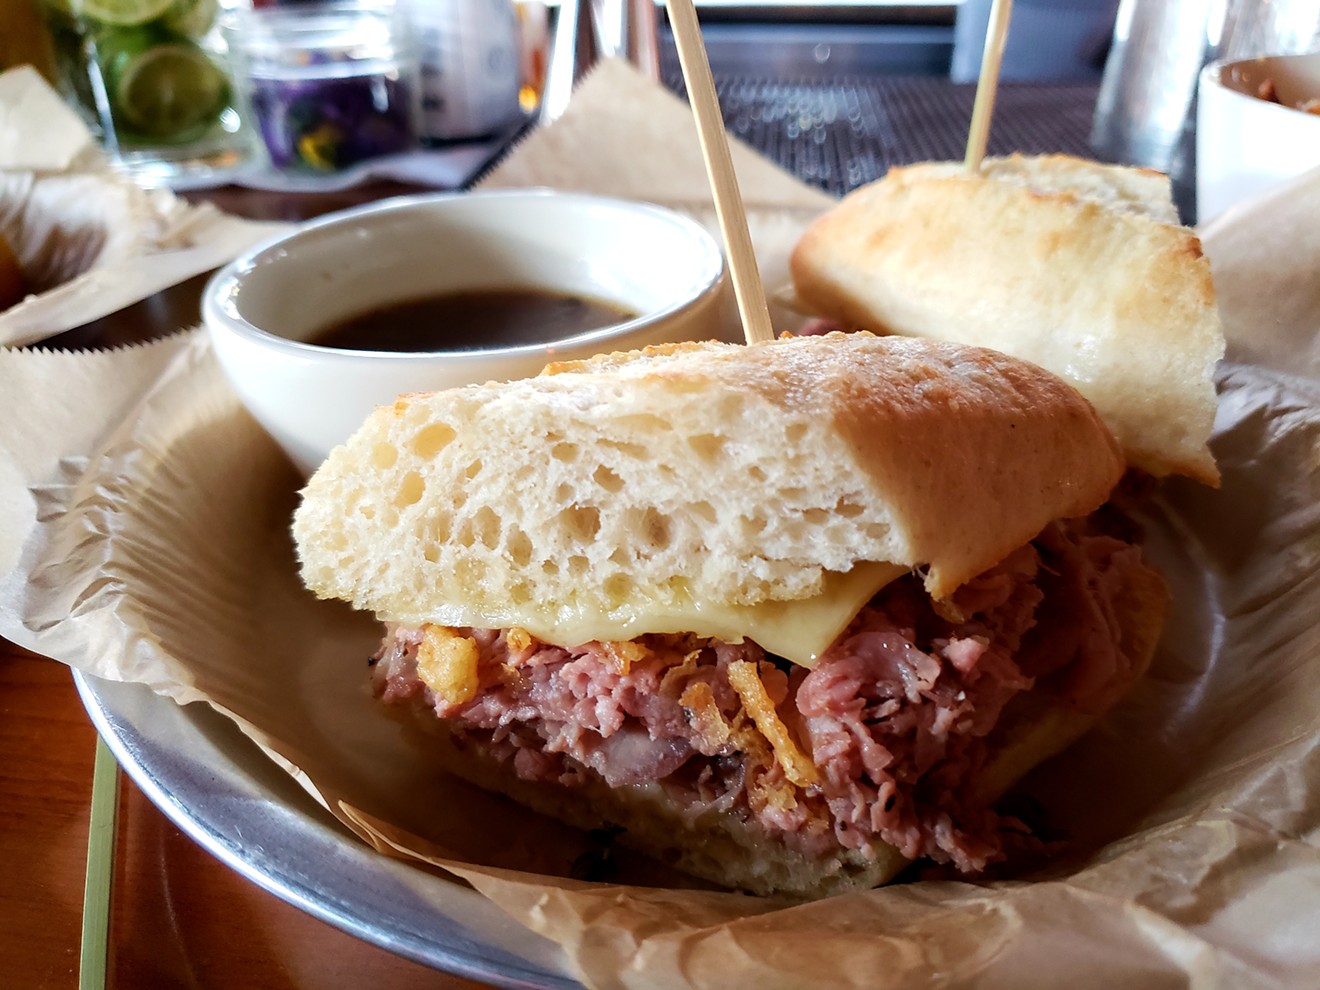 The Frenchie dip, one of the sandwiches on the Pony Up menu.